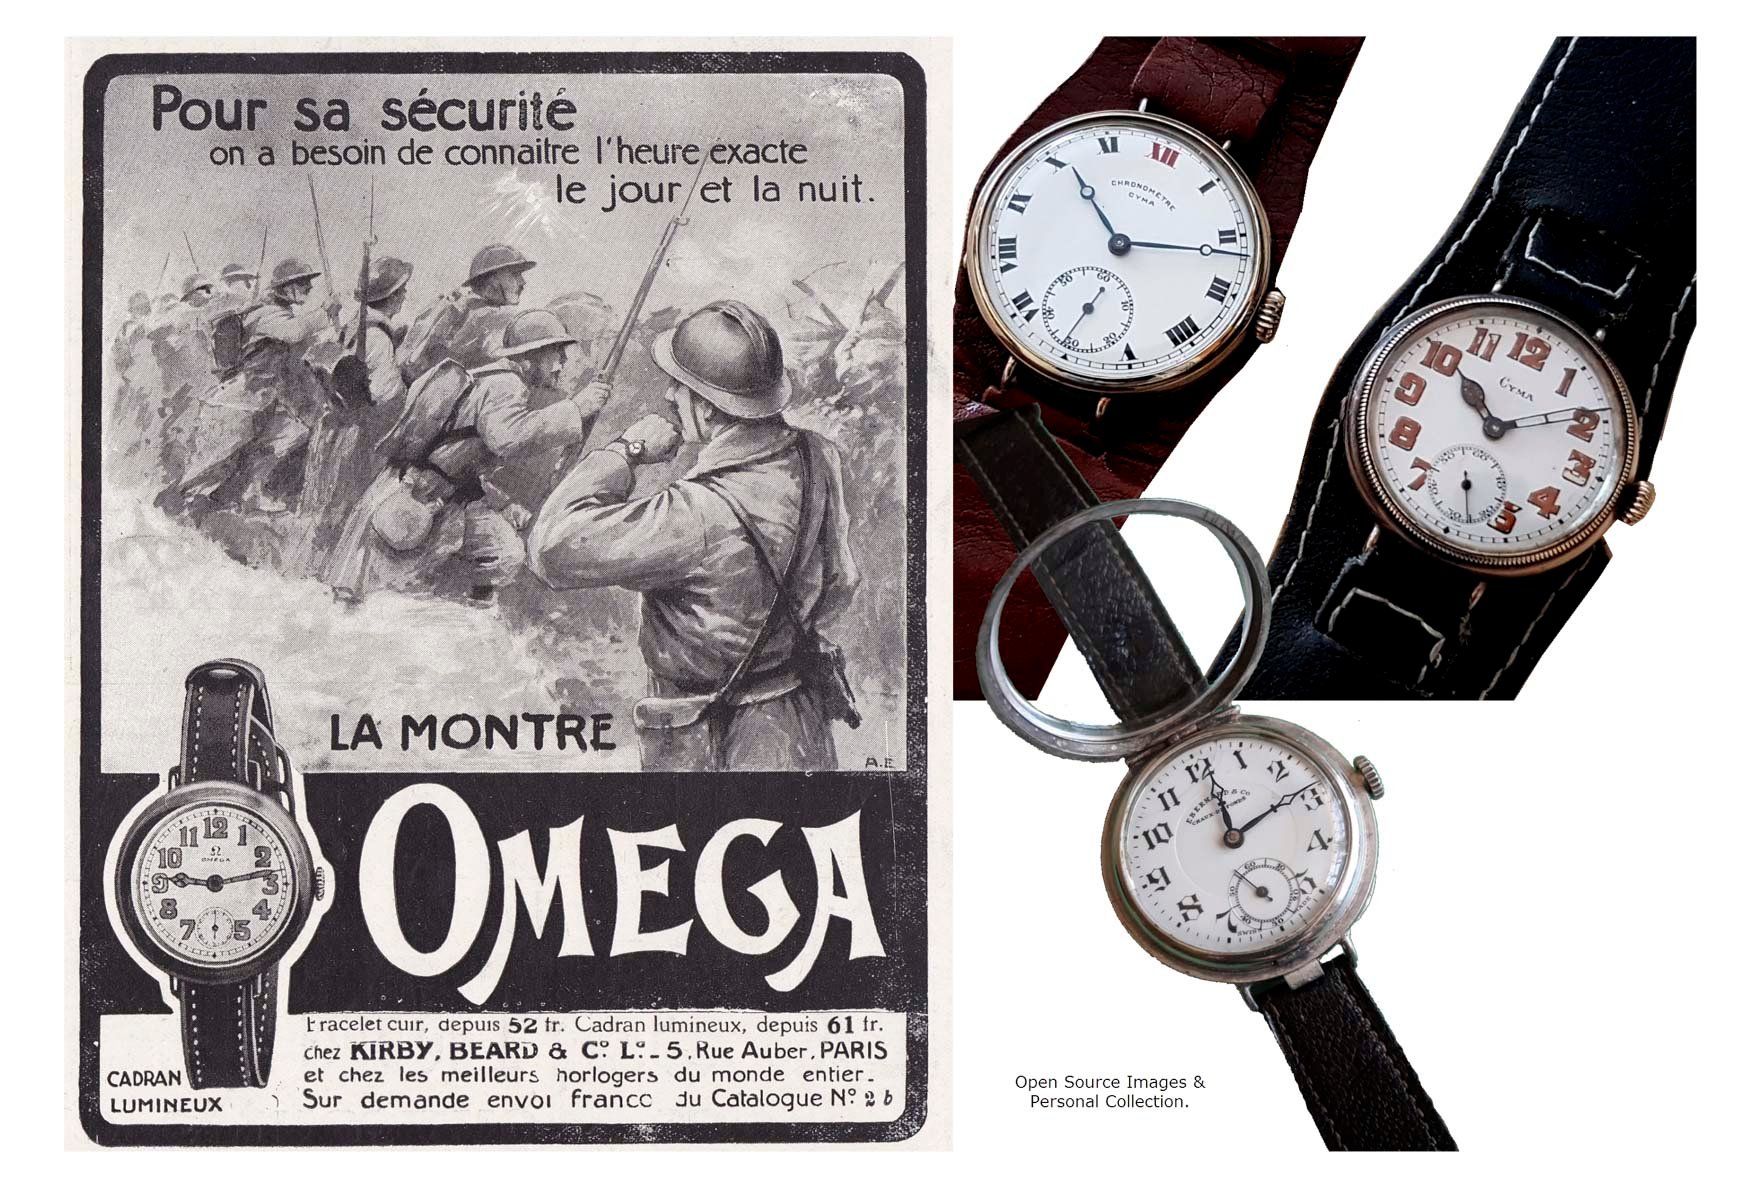 Fratelli Stories: The WWI Watches Providing A Glimpse Into Our Past